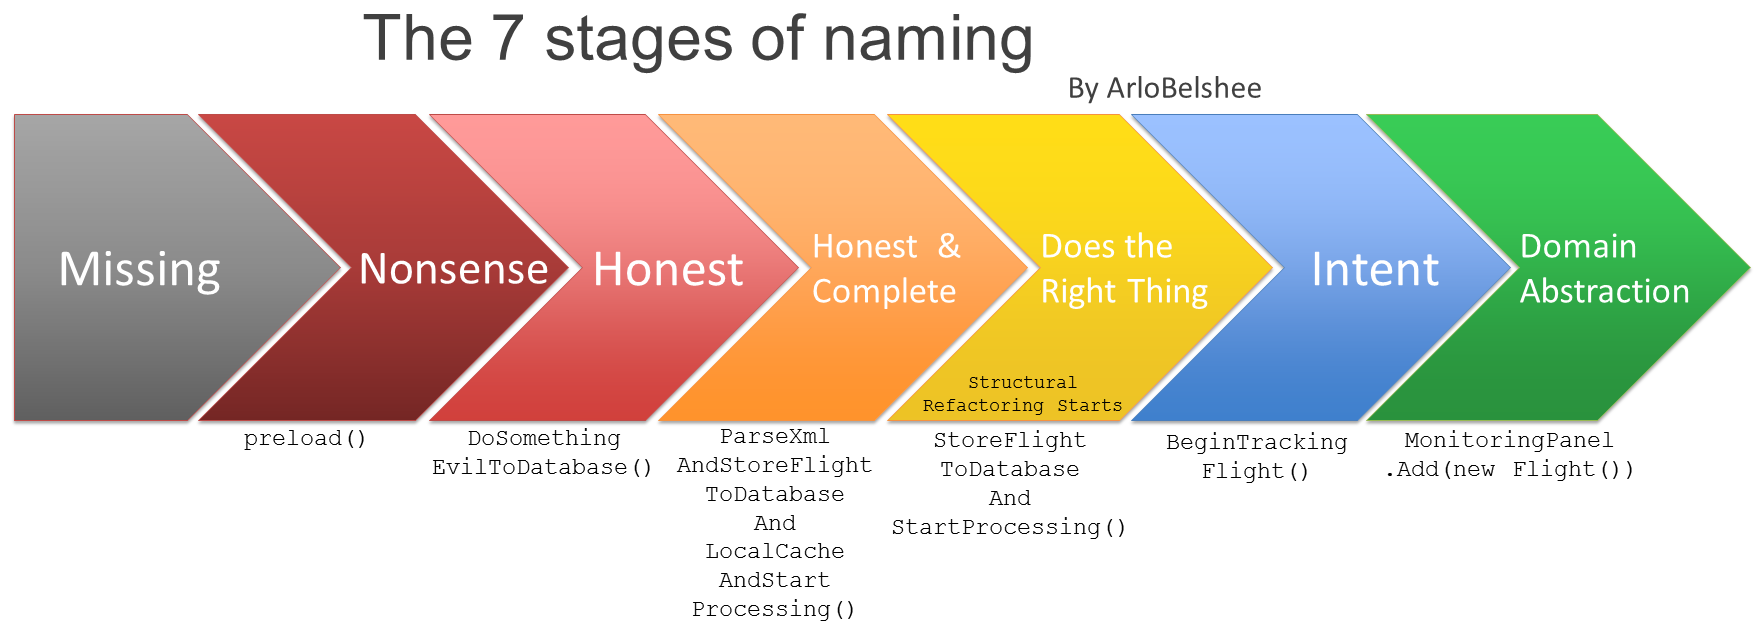 7_stages_of_naming.png